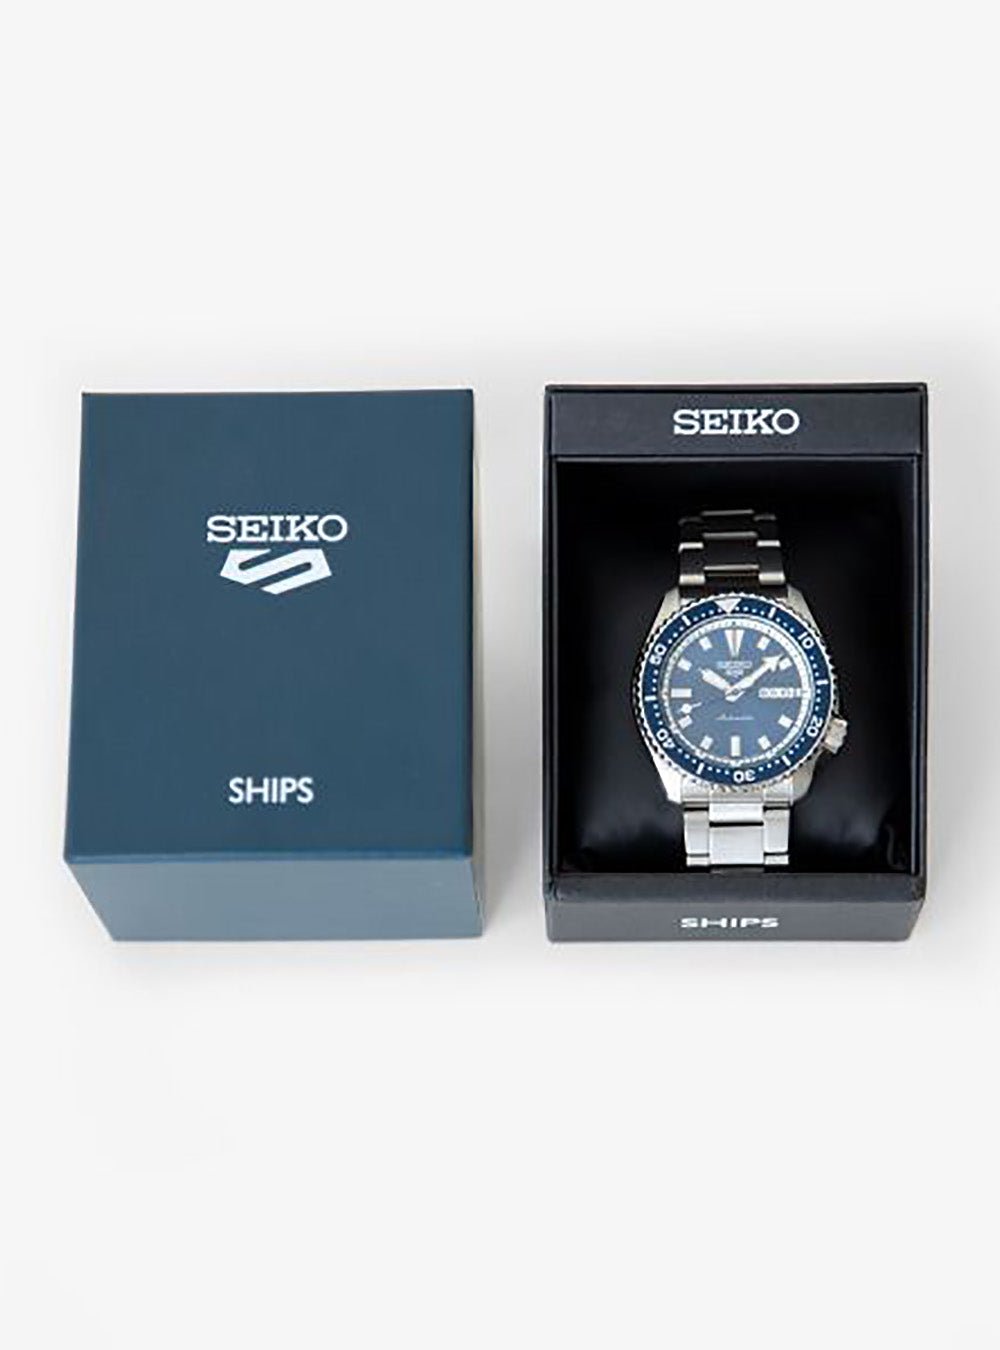 SEIKO 5 SPORTS BOY x SHIPS WATCH SBSA191 MADE IN JAPAN SPECIAL